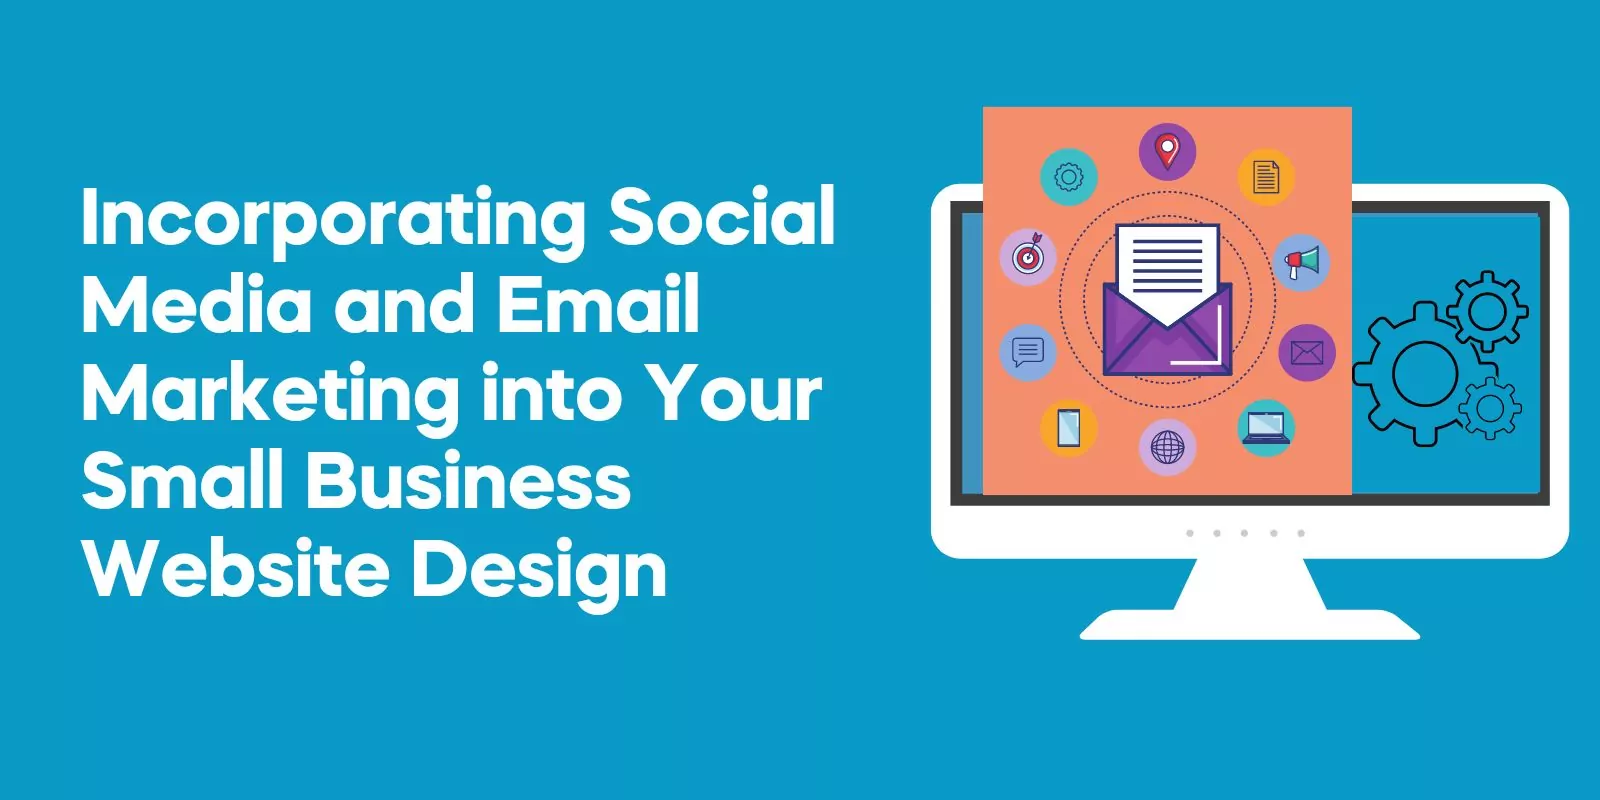 Social Media and Email Marketing into Your Small Business